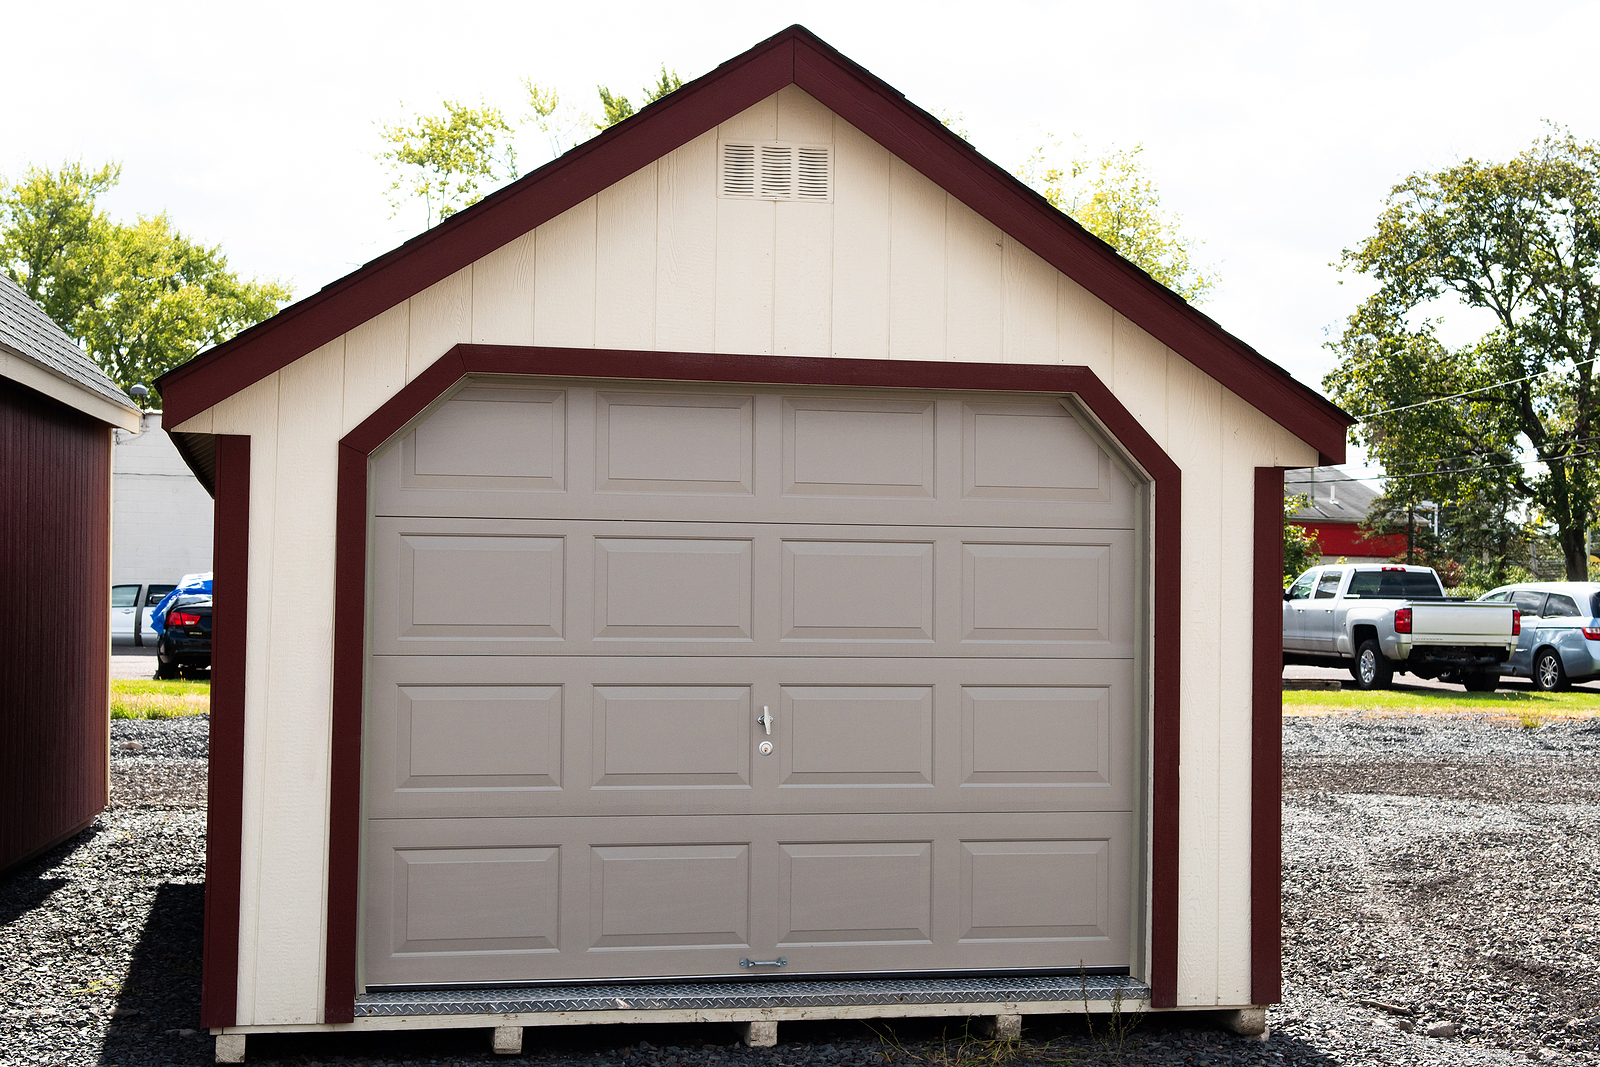 Decorating Tips For That Area Between The House And Detached Garage